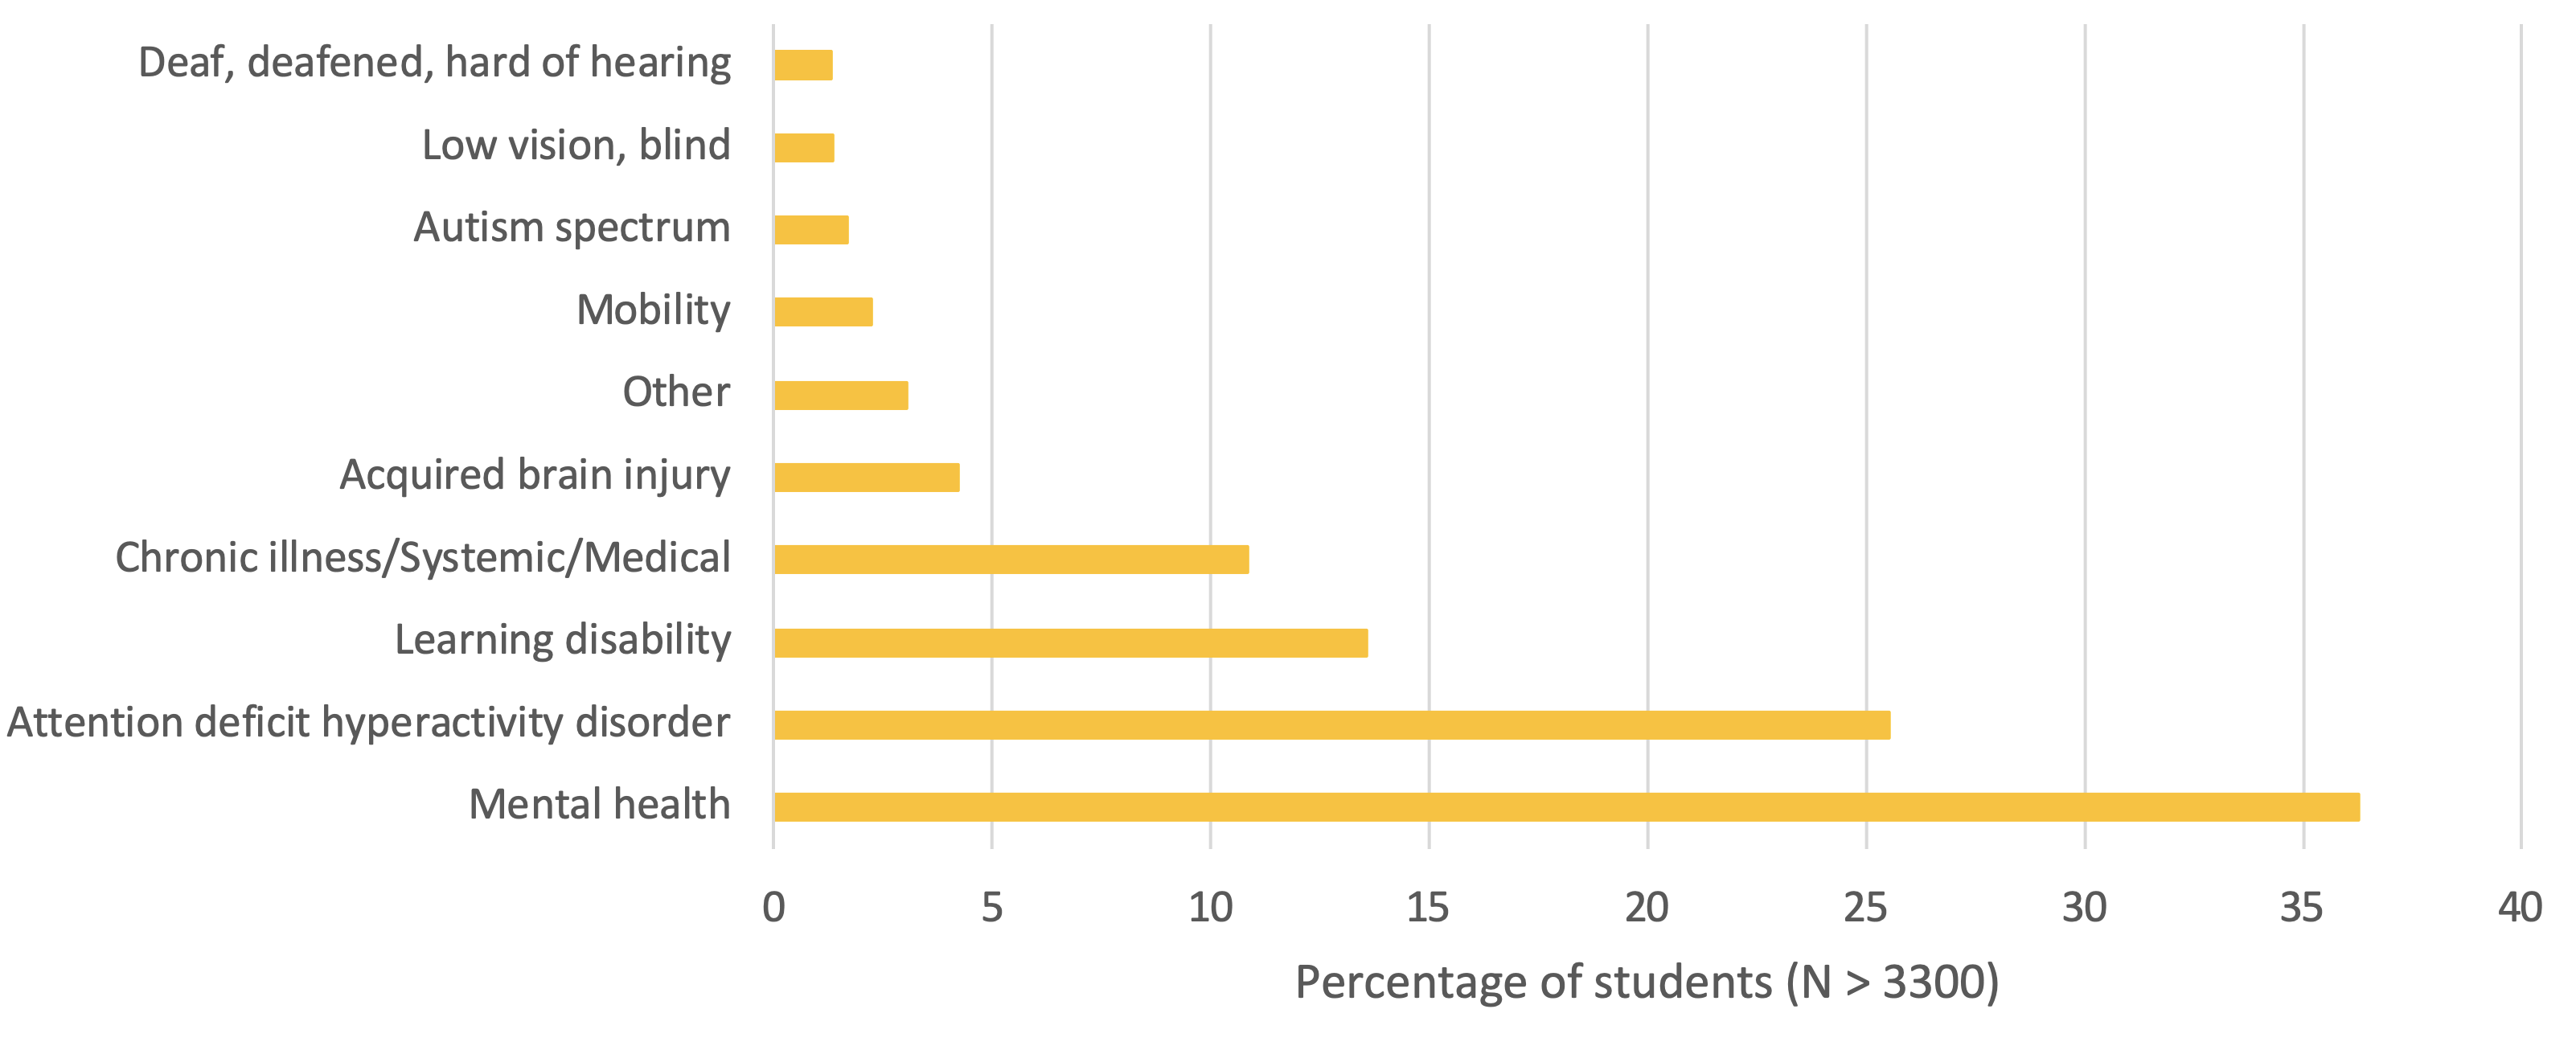 Graphic that shows the percentage of students with the reasons for their various approved accommodations: deaf, deafened, hard of hearing (2%); low vision, blind (2%); autism spectrum (3%); Mobility (3%); Other (3%); Acquired brain injury (4%); Chronic illness/systemic/medical (12%); Learning disability (13%); Attention deficit hyperactivity disorder (26%); Mental health (37%)